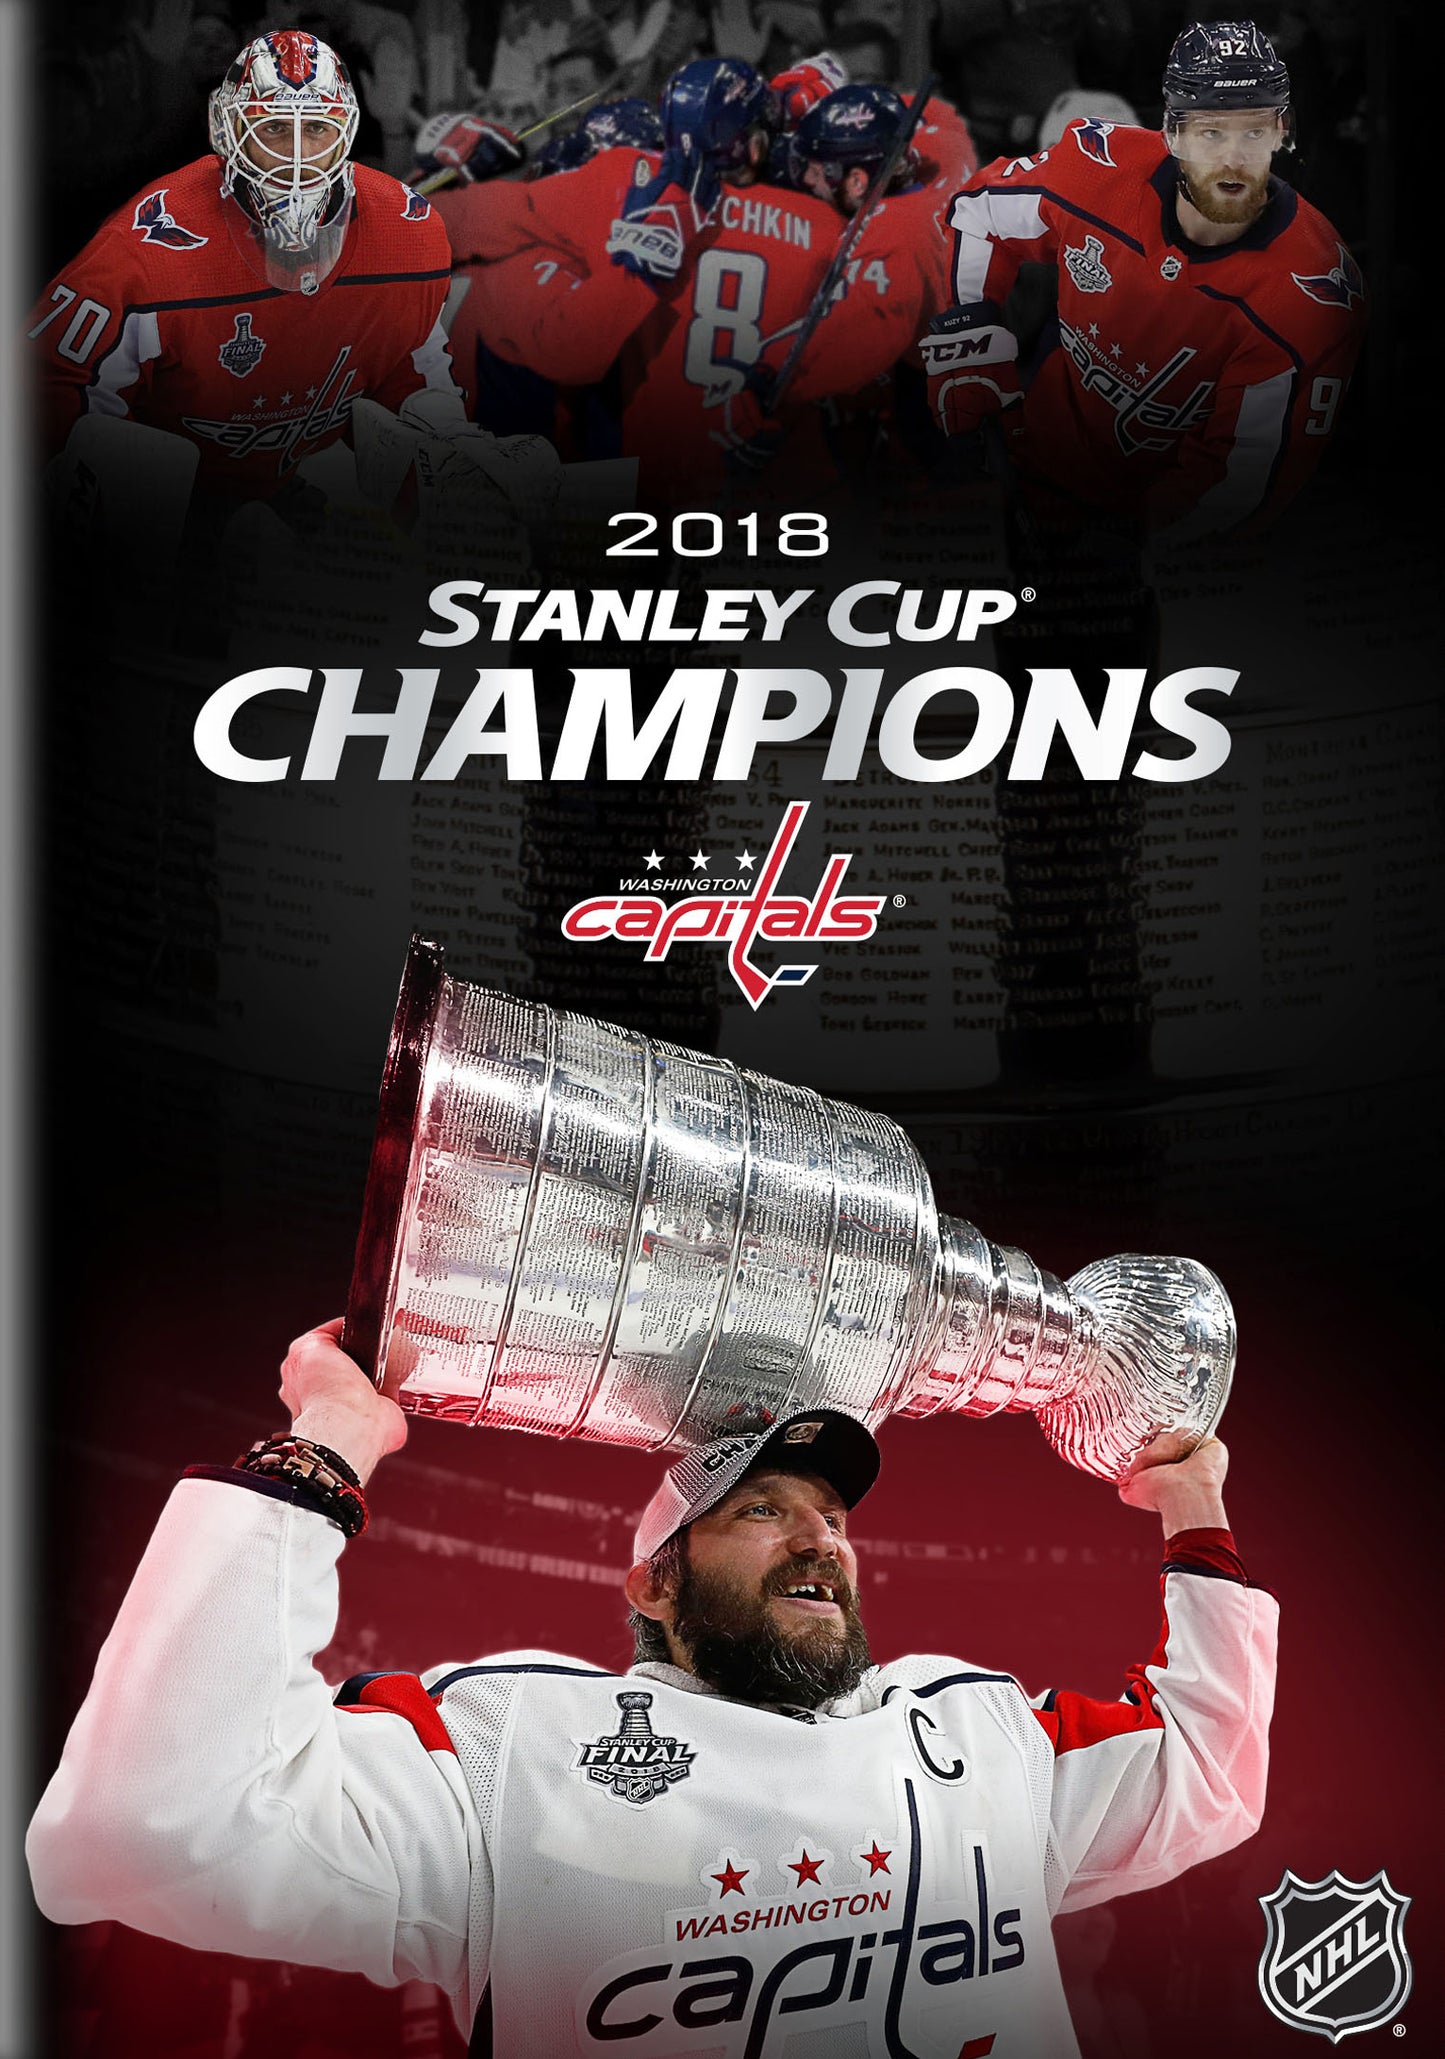 NHL: 2018 Stanley Cup Champions cover art